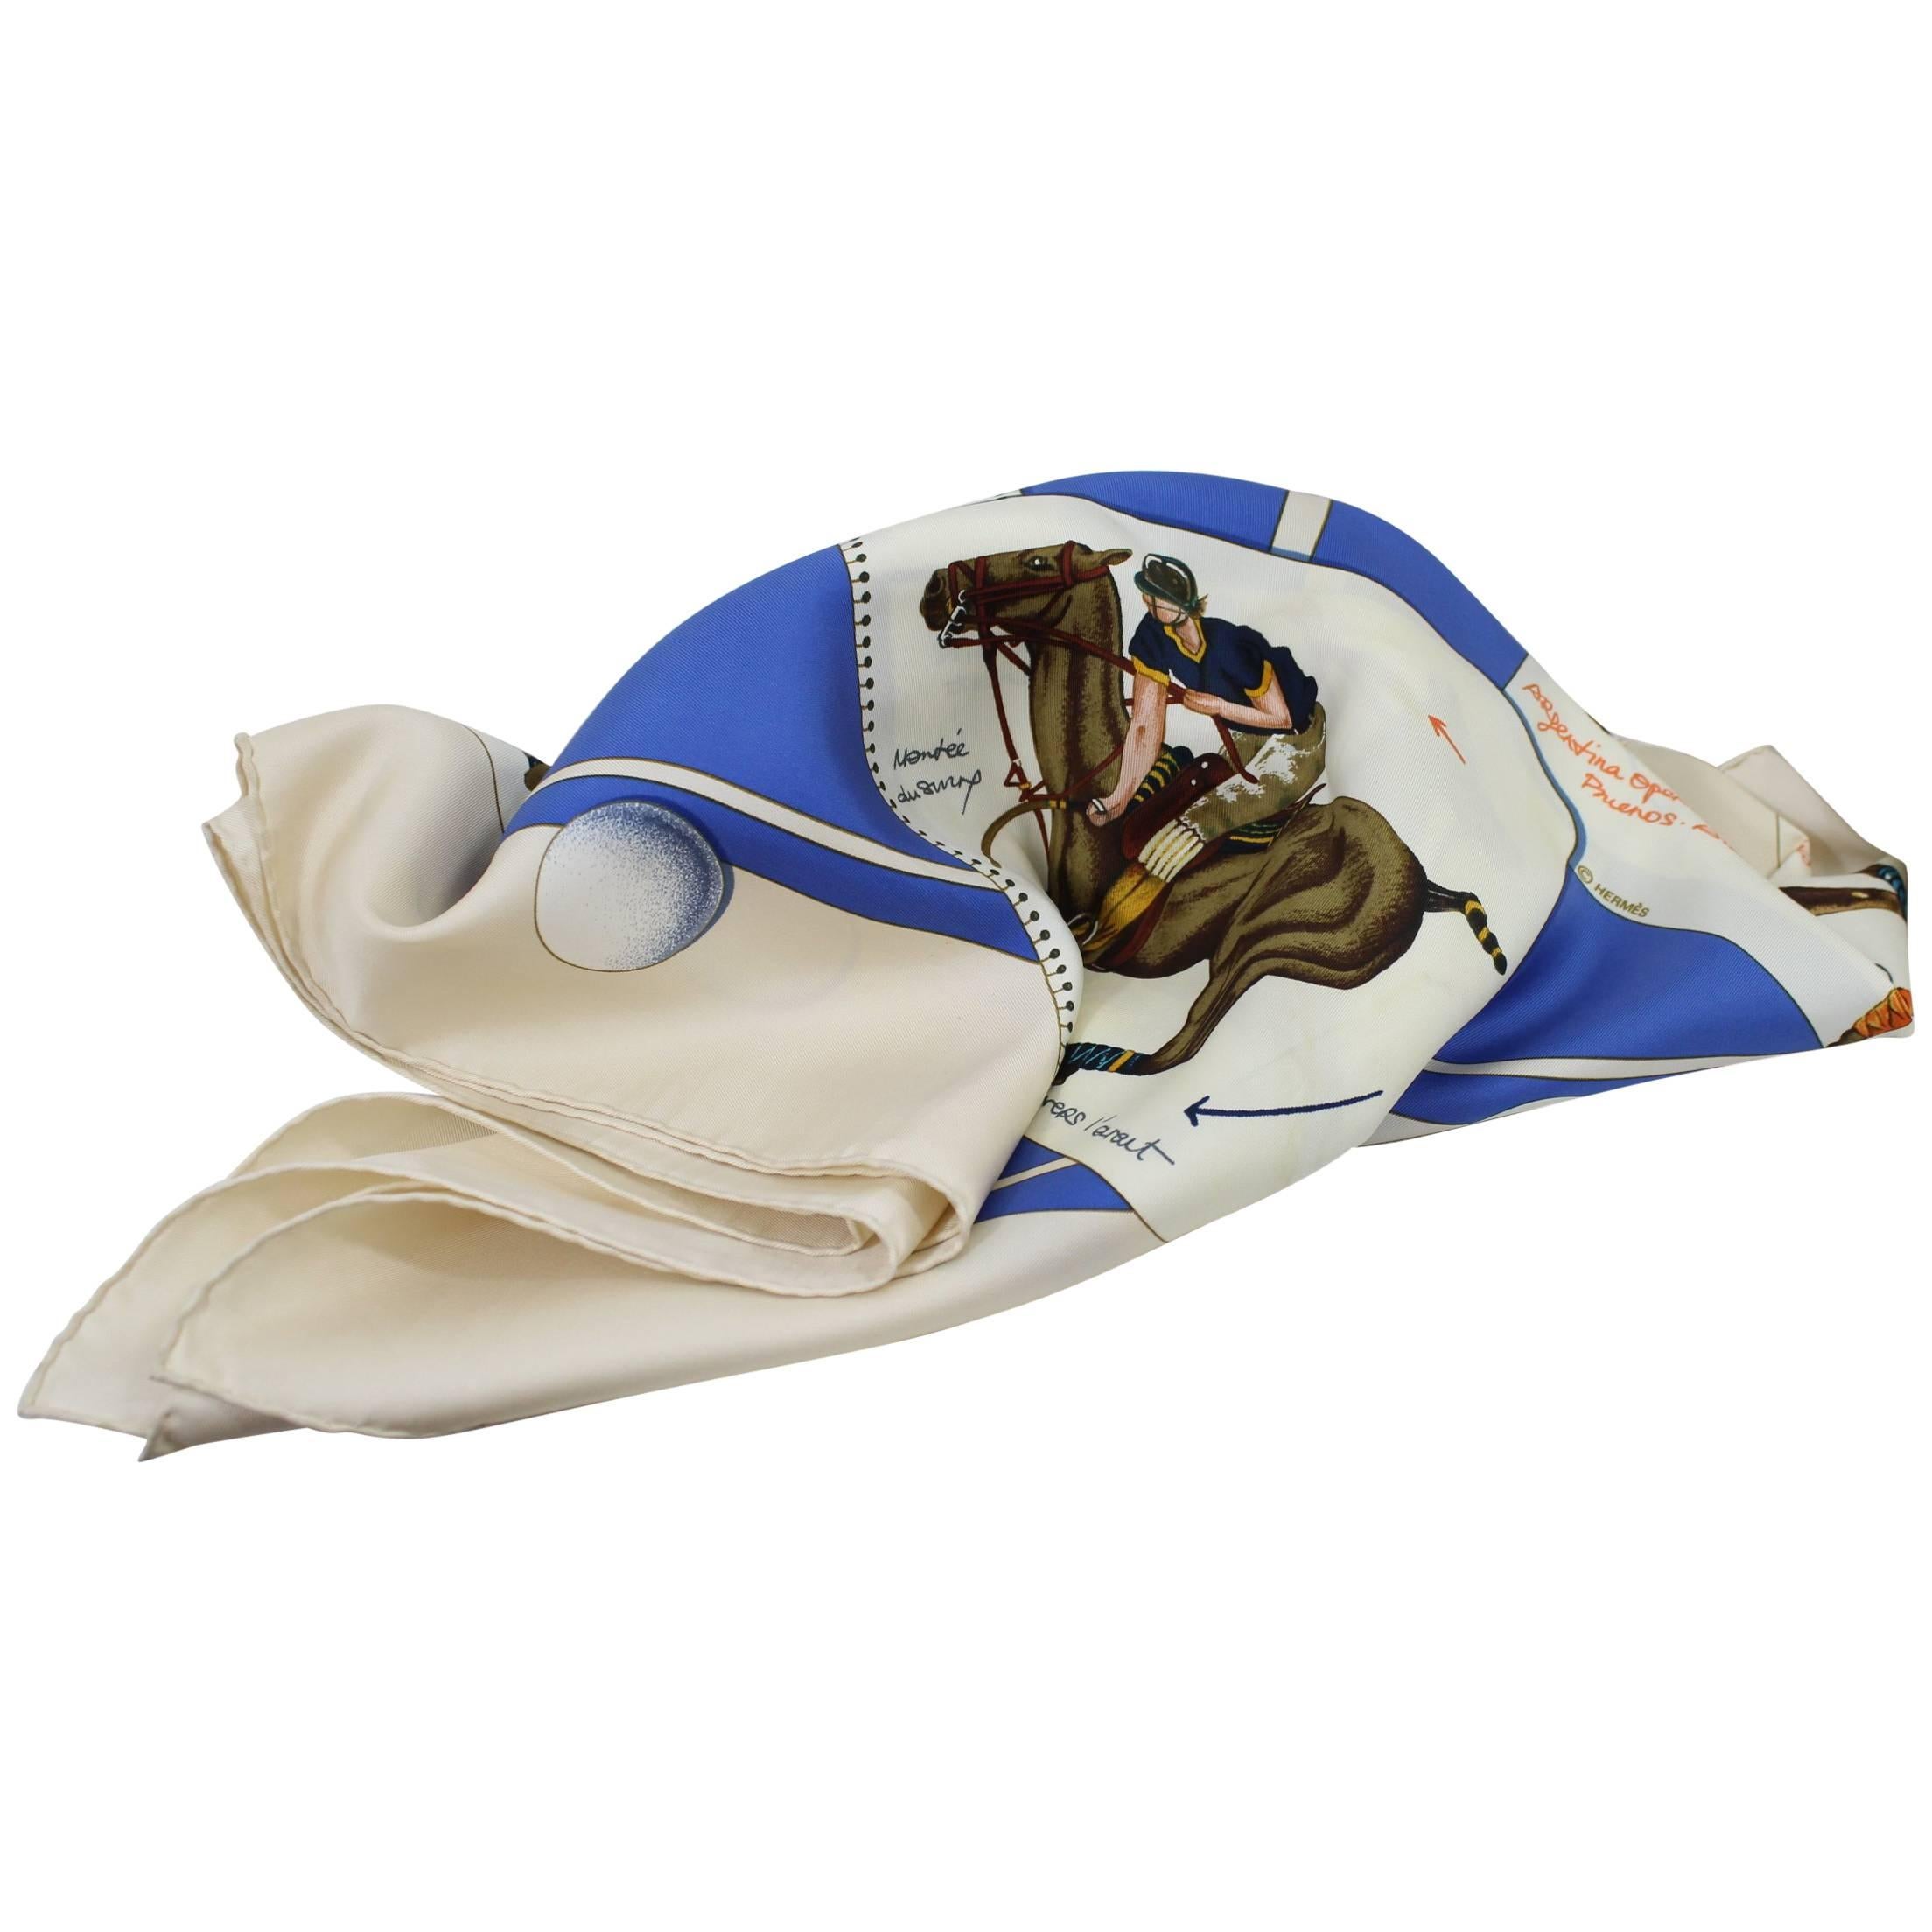 Lovely Hard to find Hermes Silk Scarf "Polo Cup Palm Beach"